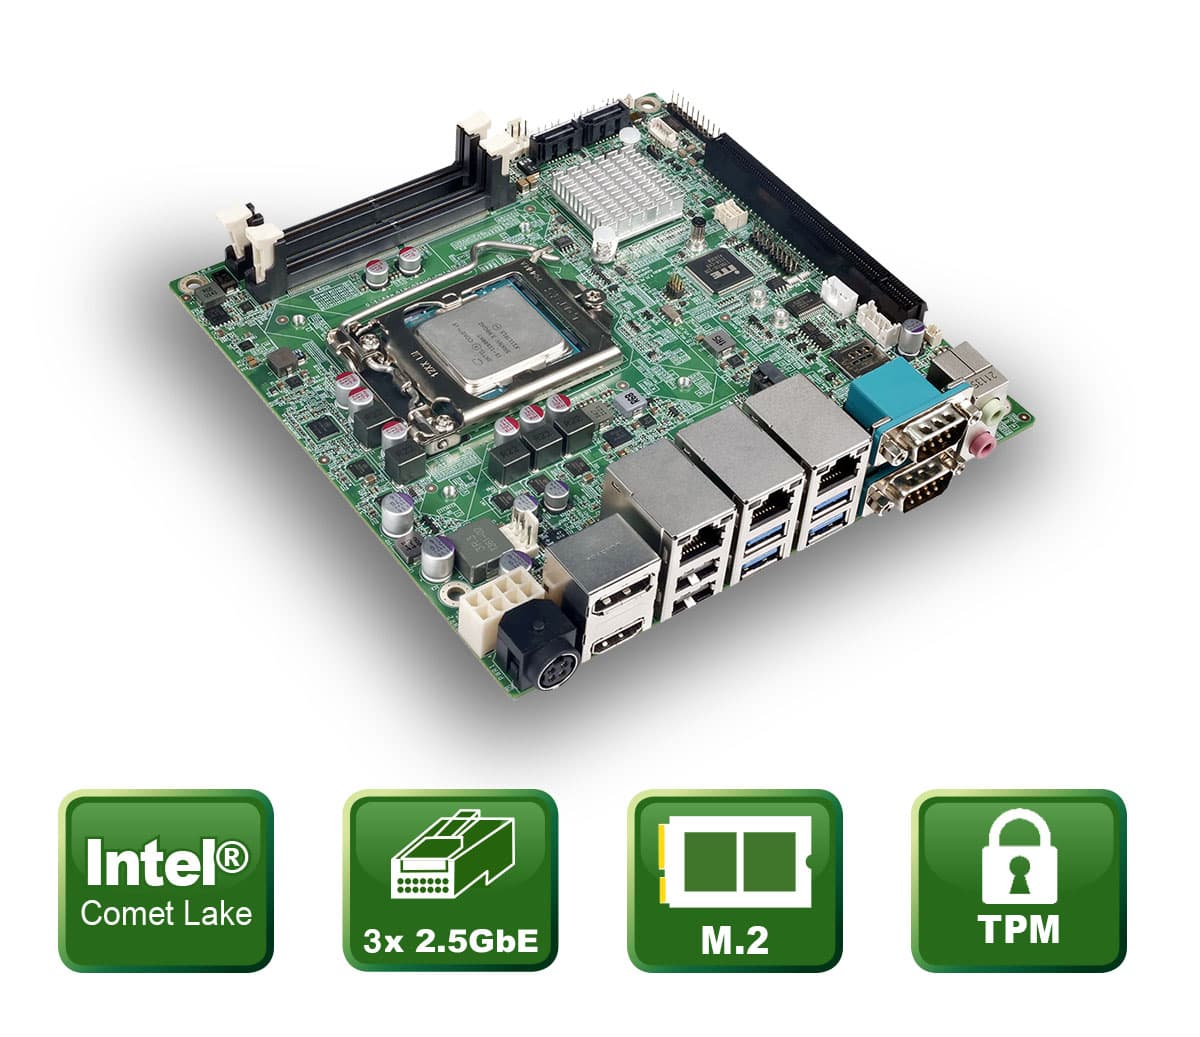 Mini-ITX board for industrial and medical applications